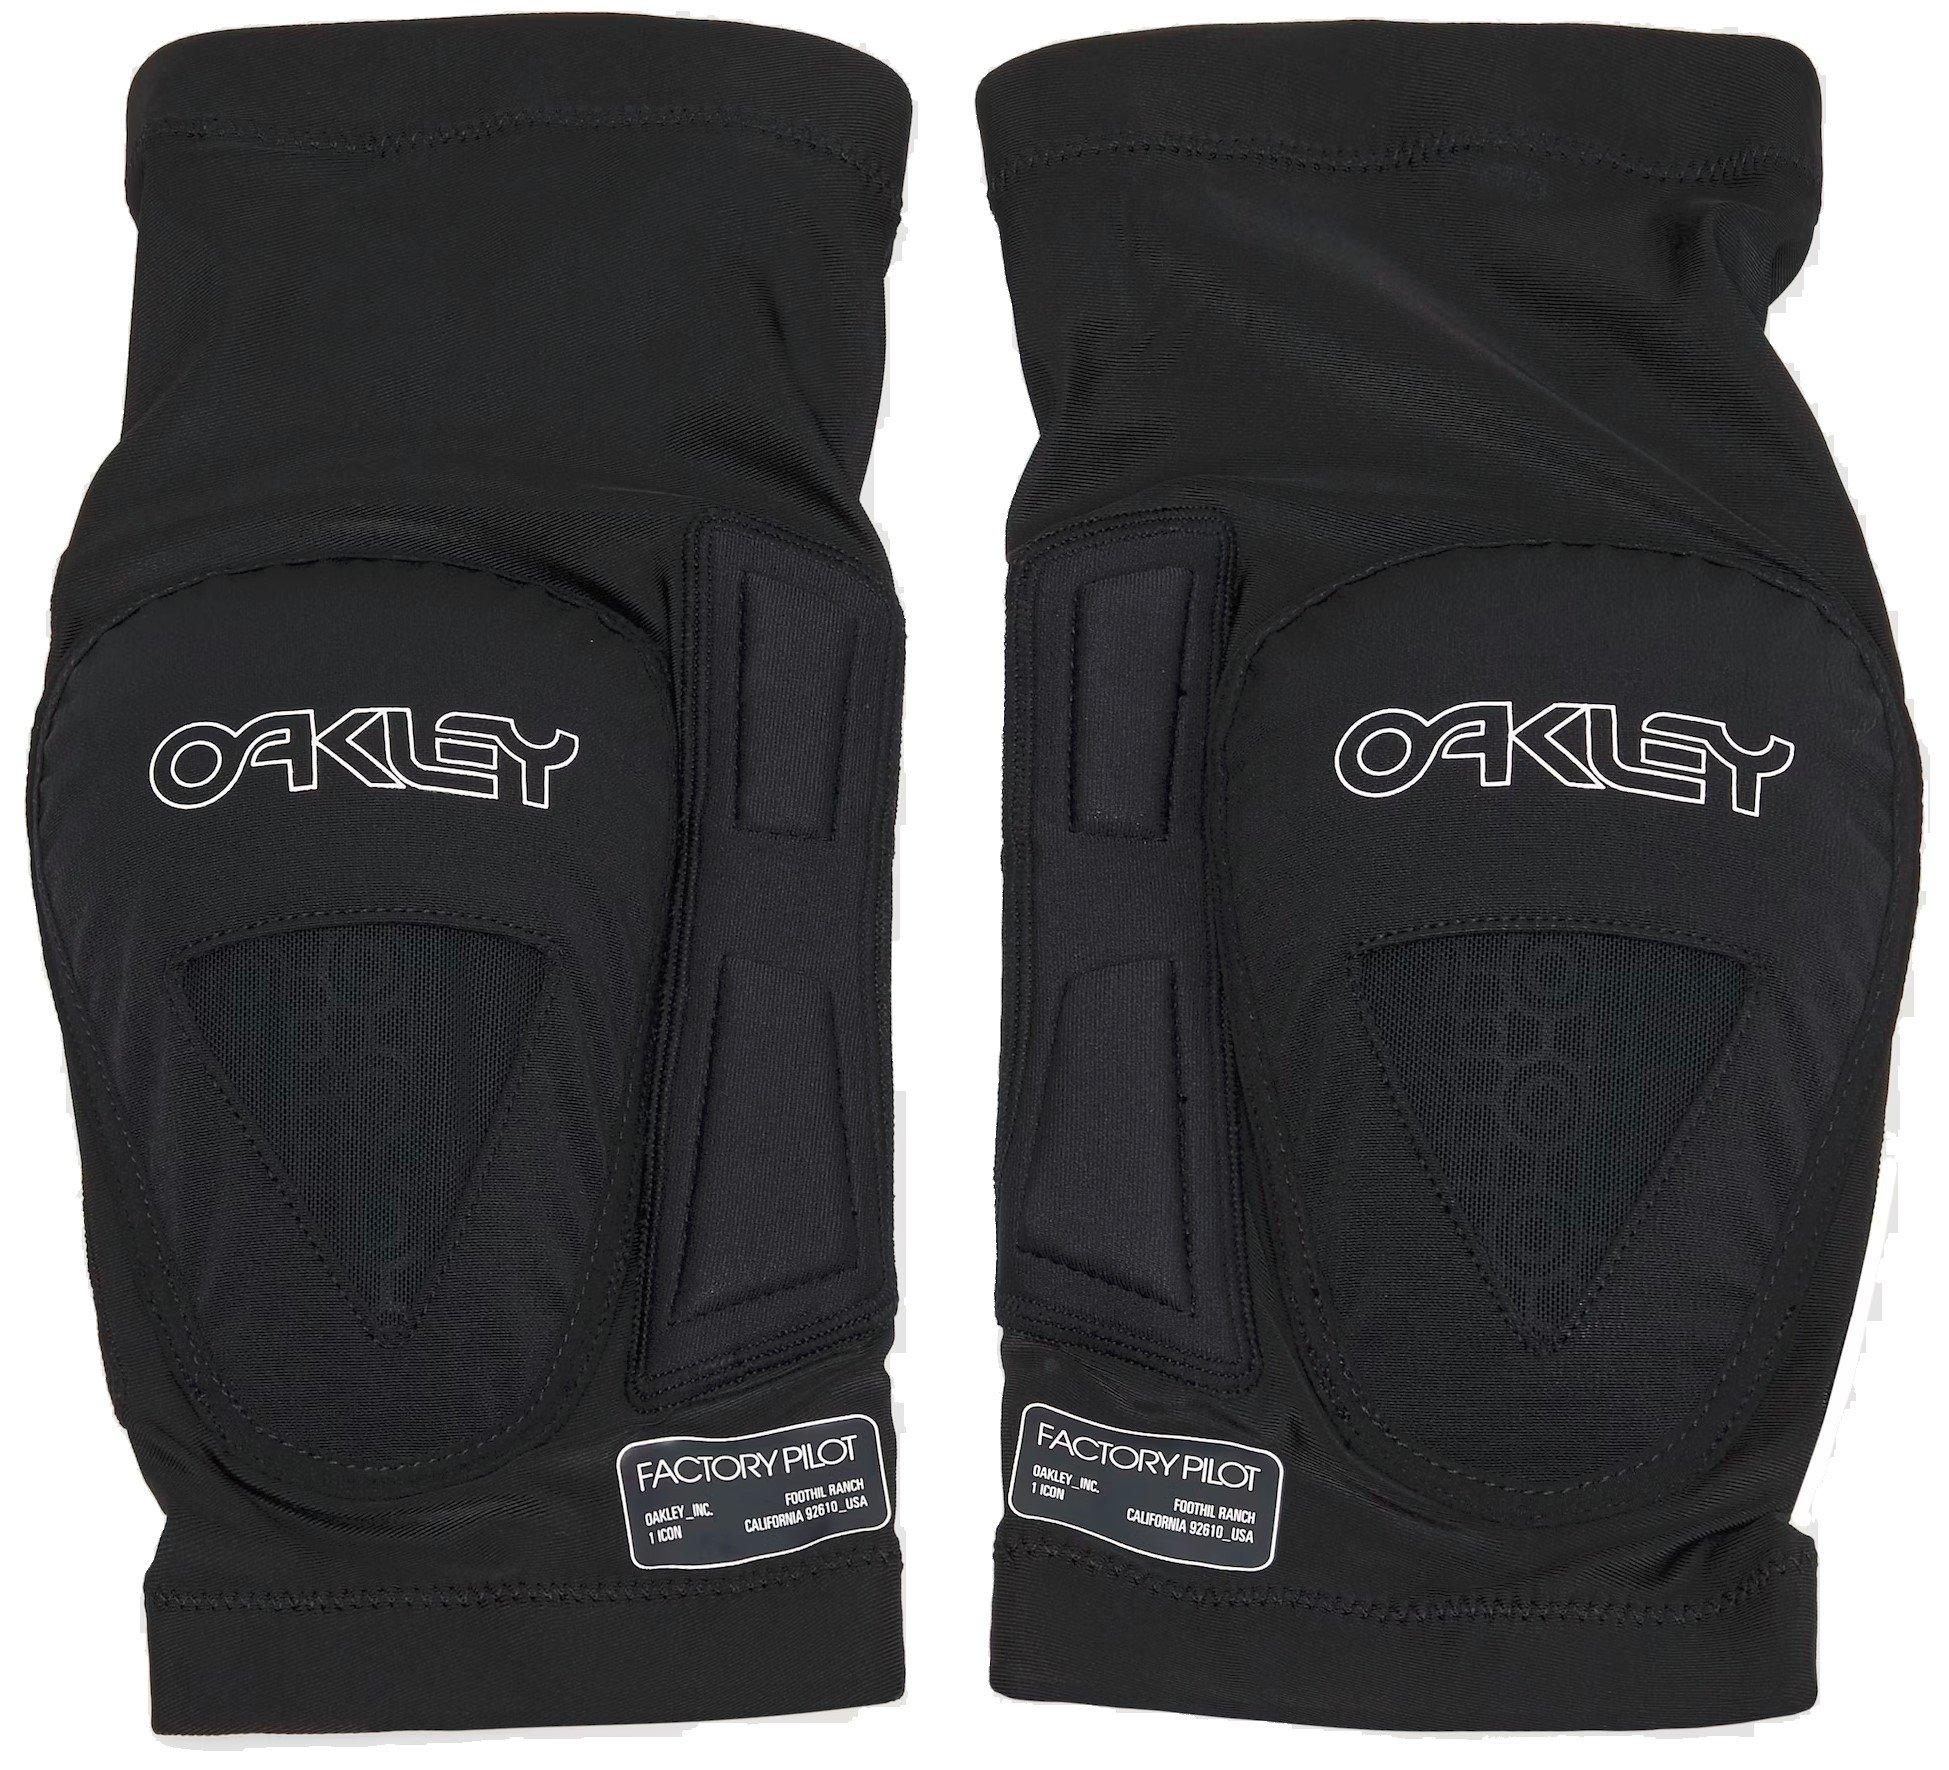 Oakley All Mountain Rz Labs Knee Grd Velikost: M/L